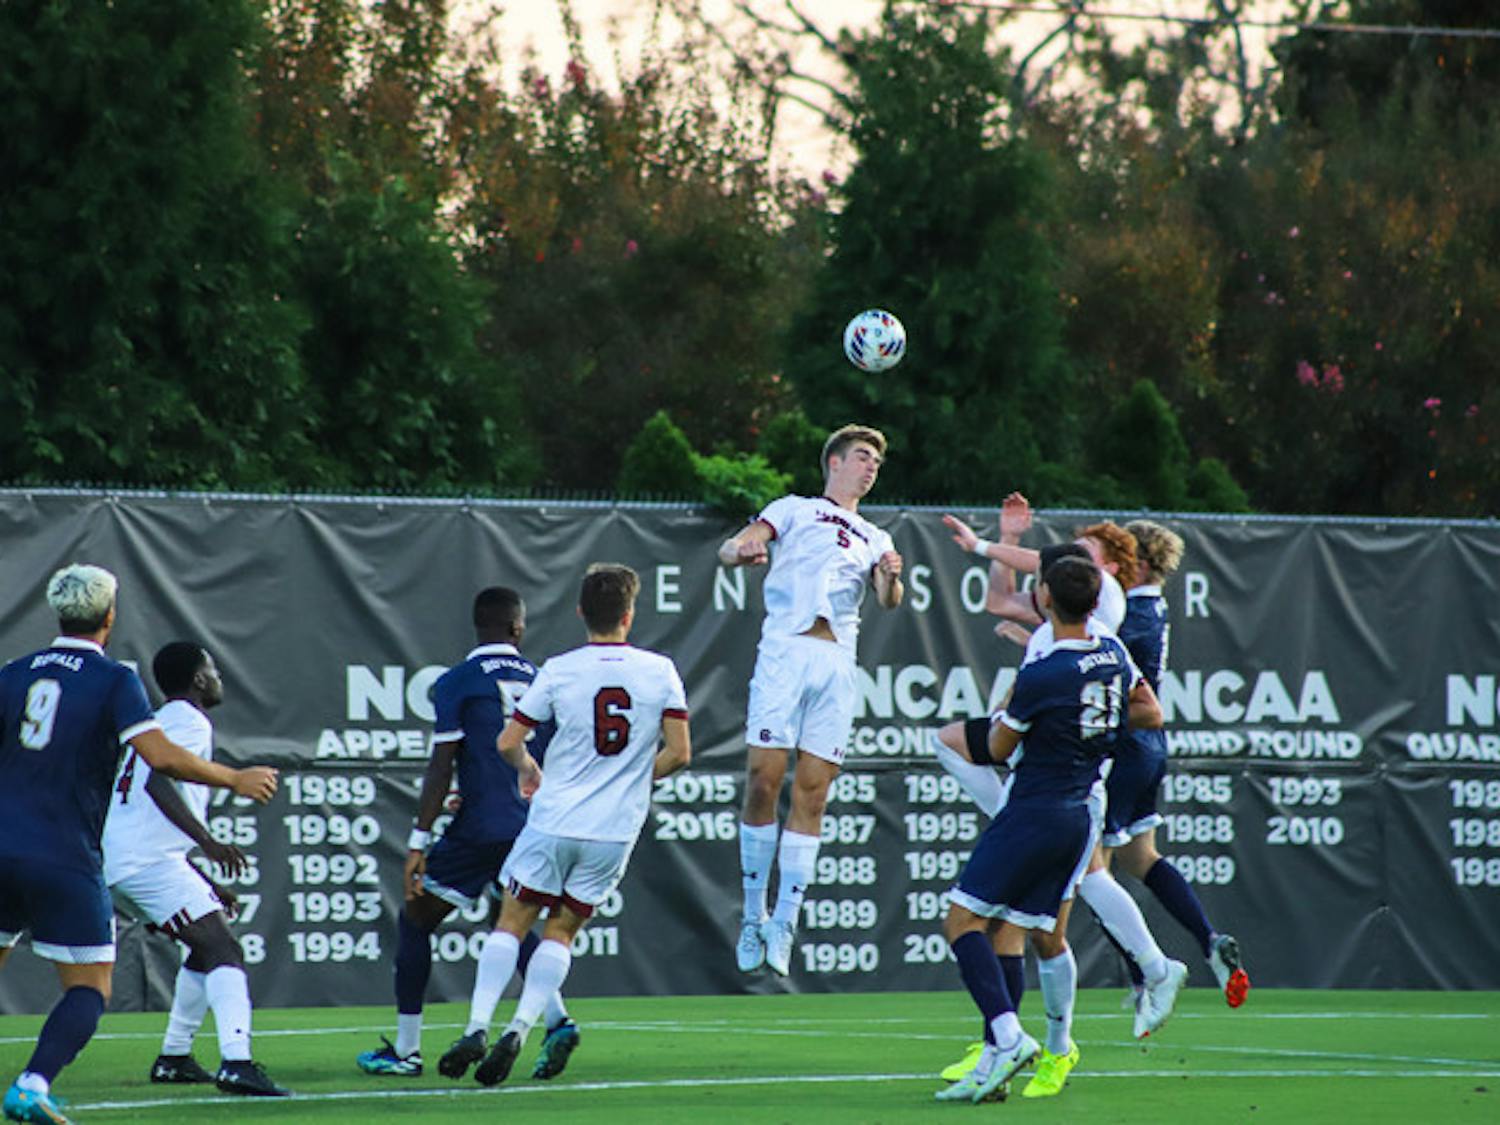 Freshman defensive midfielder William Nilsson hits a header during the South Carolina's matchup against Queens University on Sept. 20, 2022. The Gamecocks beat the Royals 3-1.